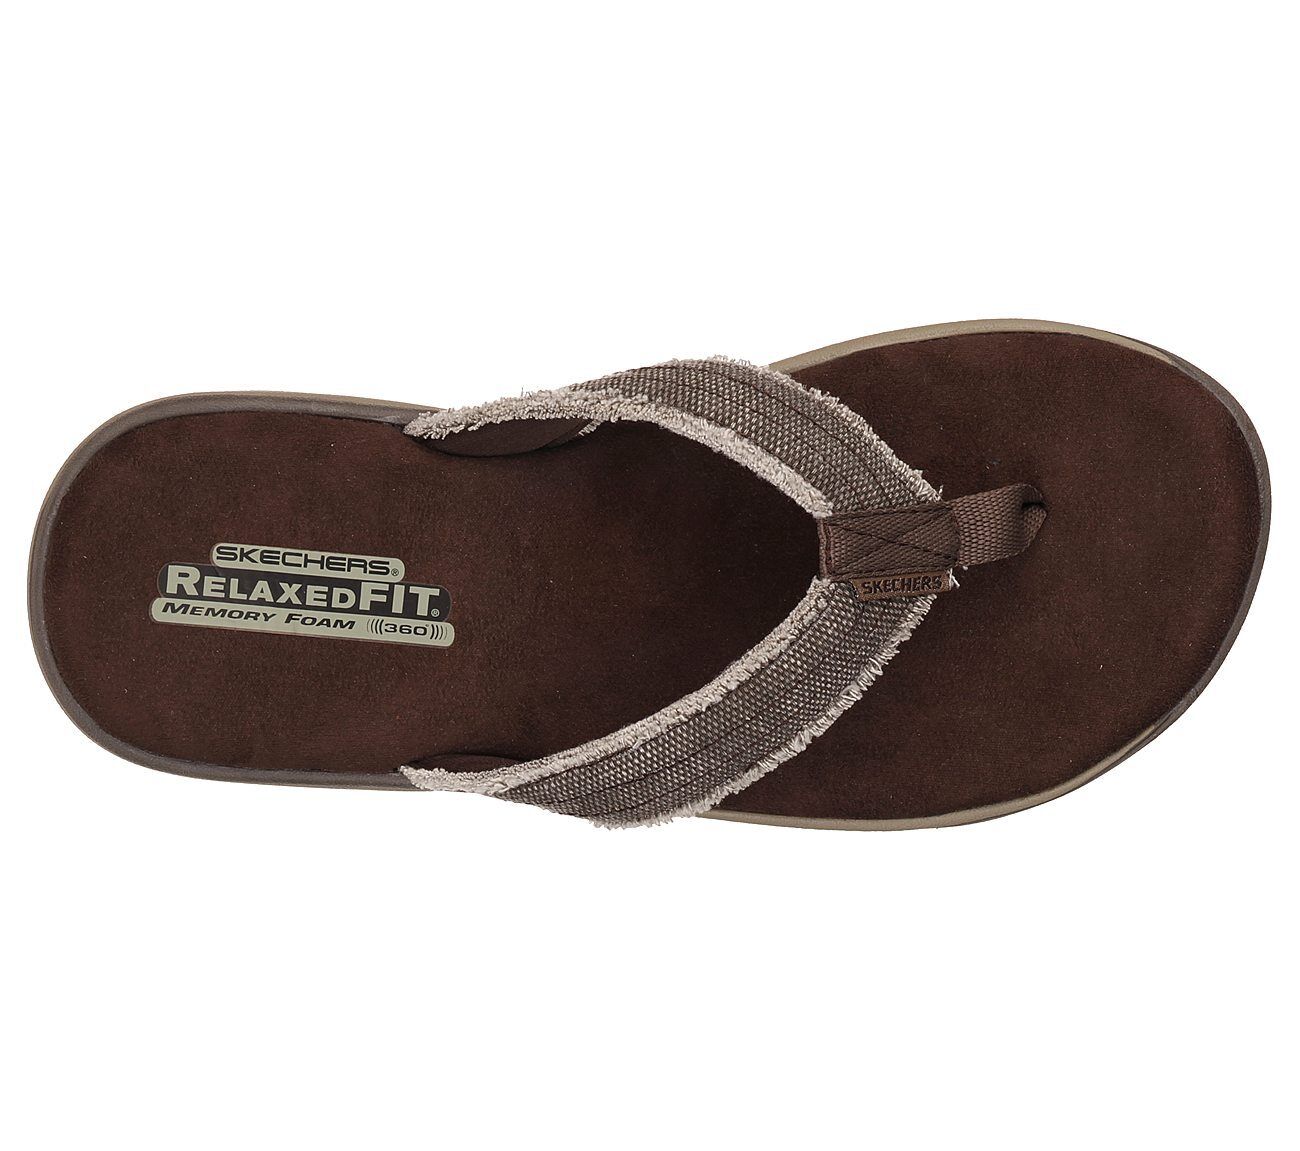 Men's Skechers Relaxed Fit: Supreme - Bosnia Sandals, 64152 /CHOC Multiple Sizes Chocolate